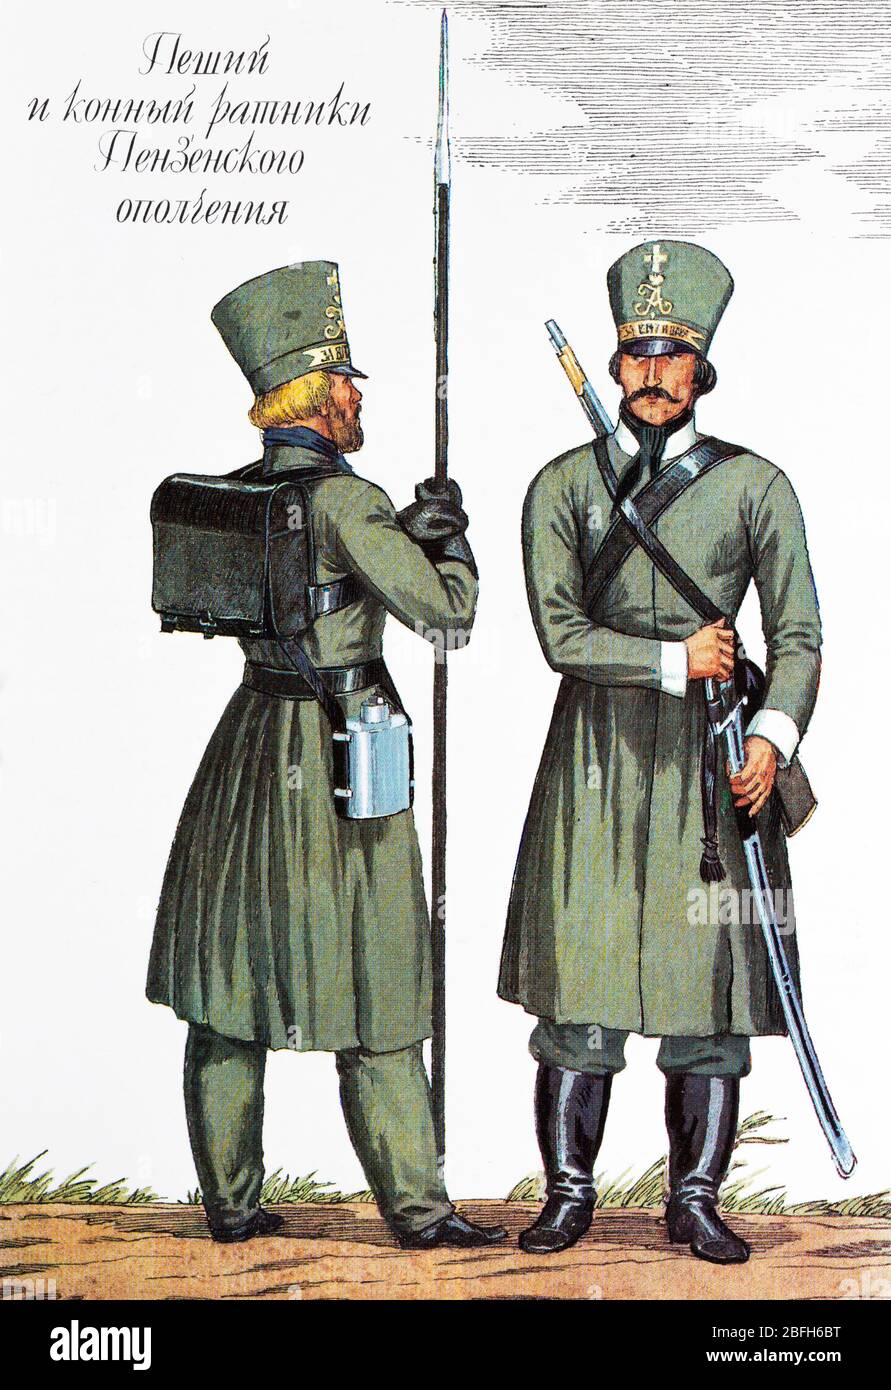 Soldiers of Penza regiment, 1812, 19th century Russian army uniform, Russia Stock Photo